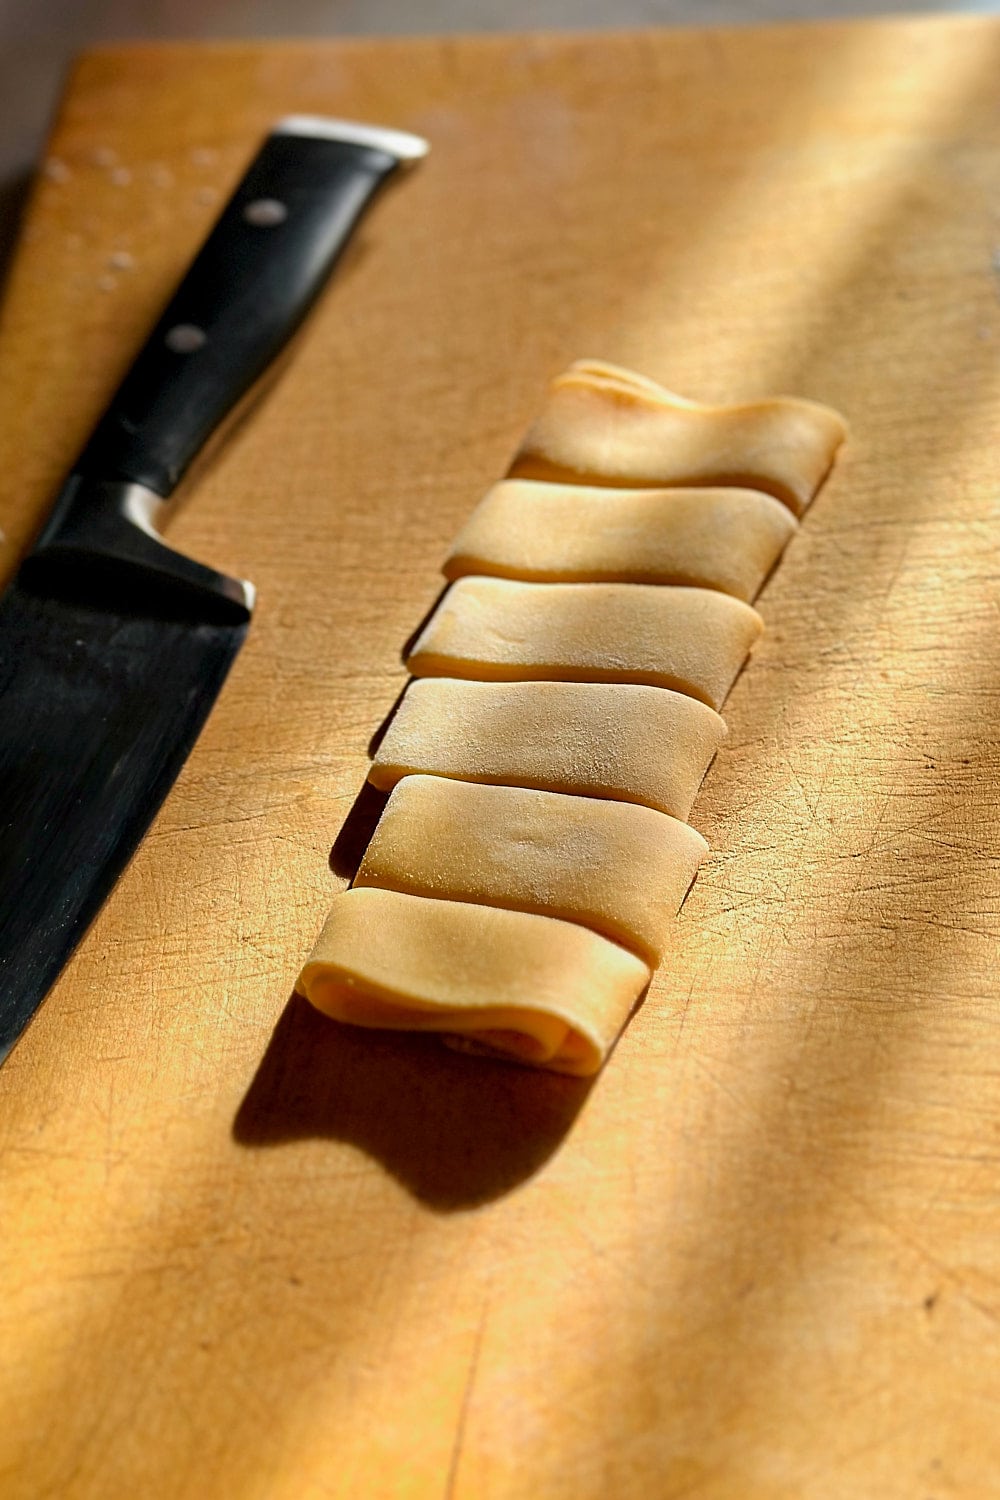 Cutting a sheet of pasta dough into wide strips on a wooden board to make homemade pappardelle pasta.